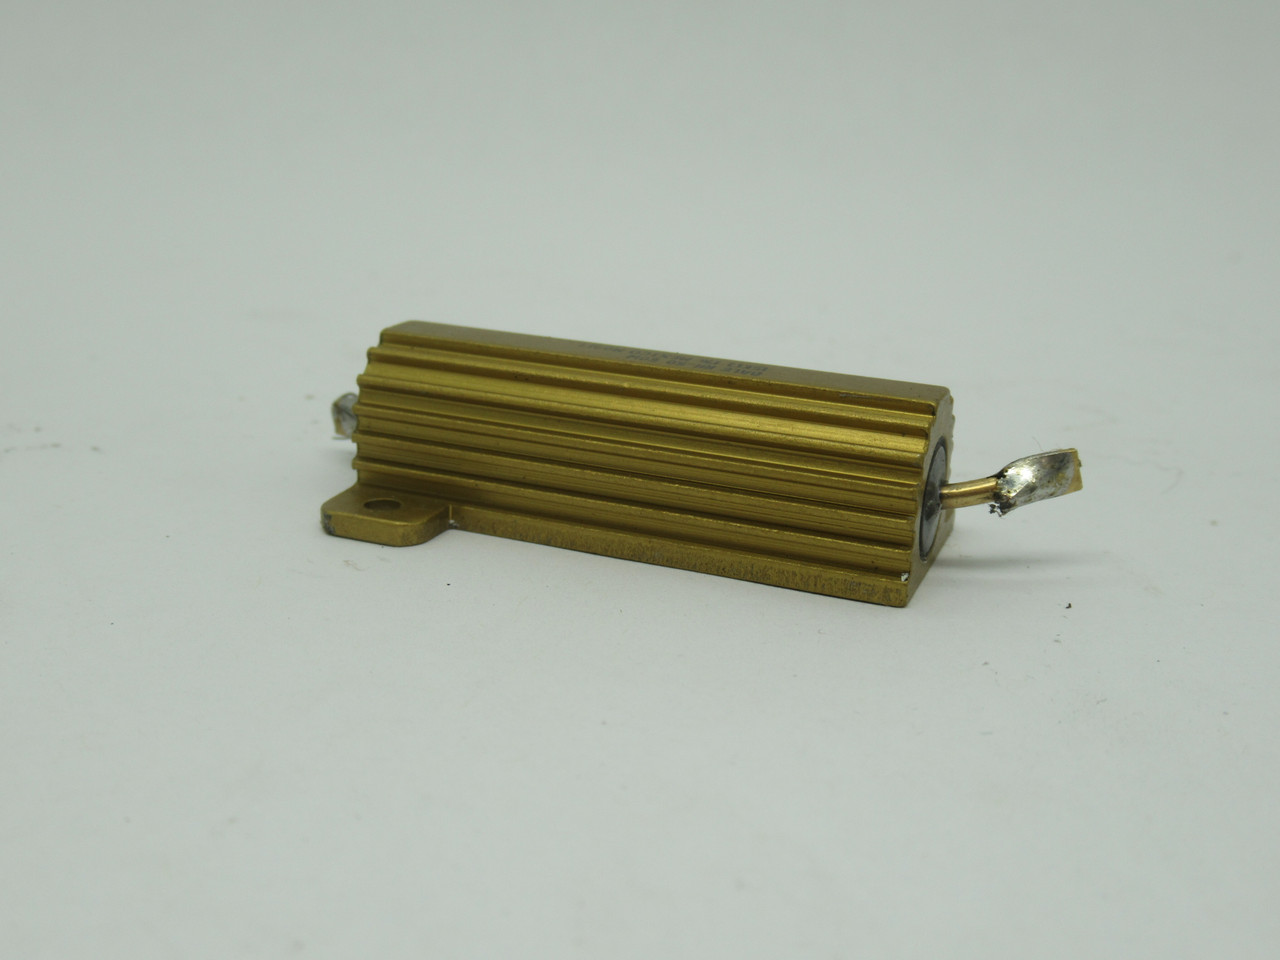 Dale RH05015R00FC02 Wire Wound Resistor 50W 15K Resistance 1% SOLDERED ENDS USED